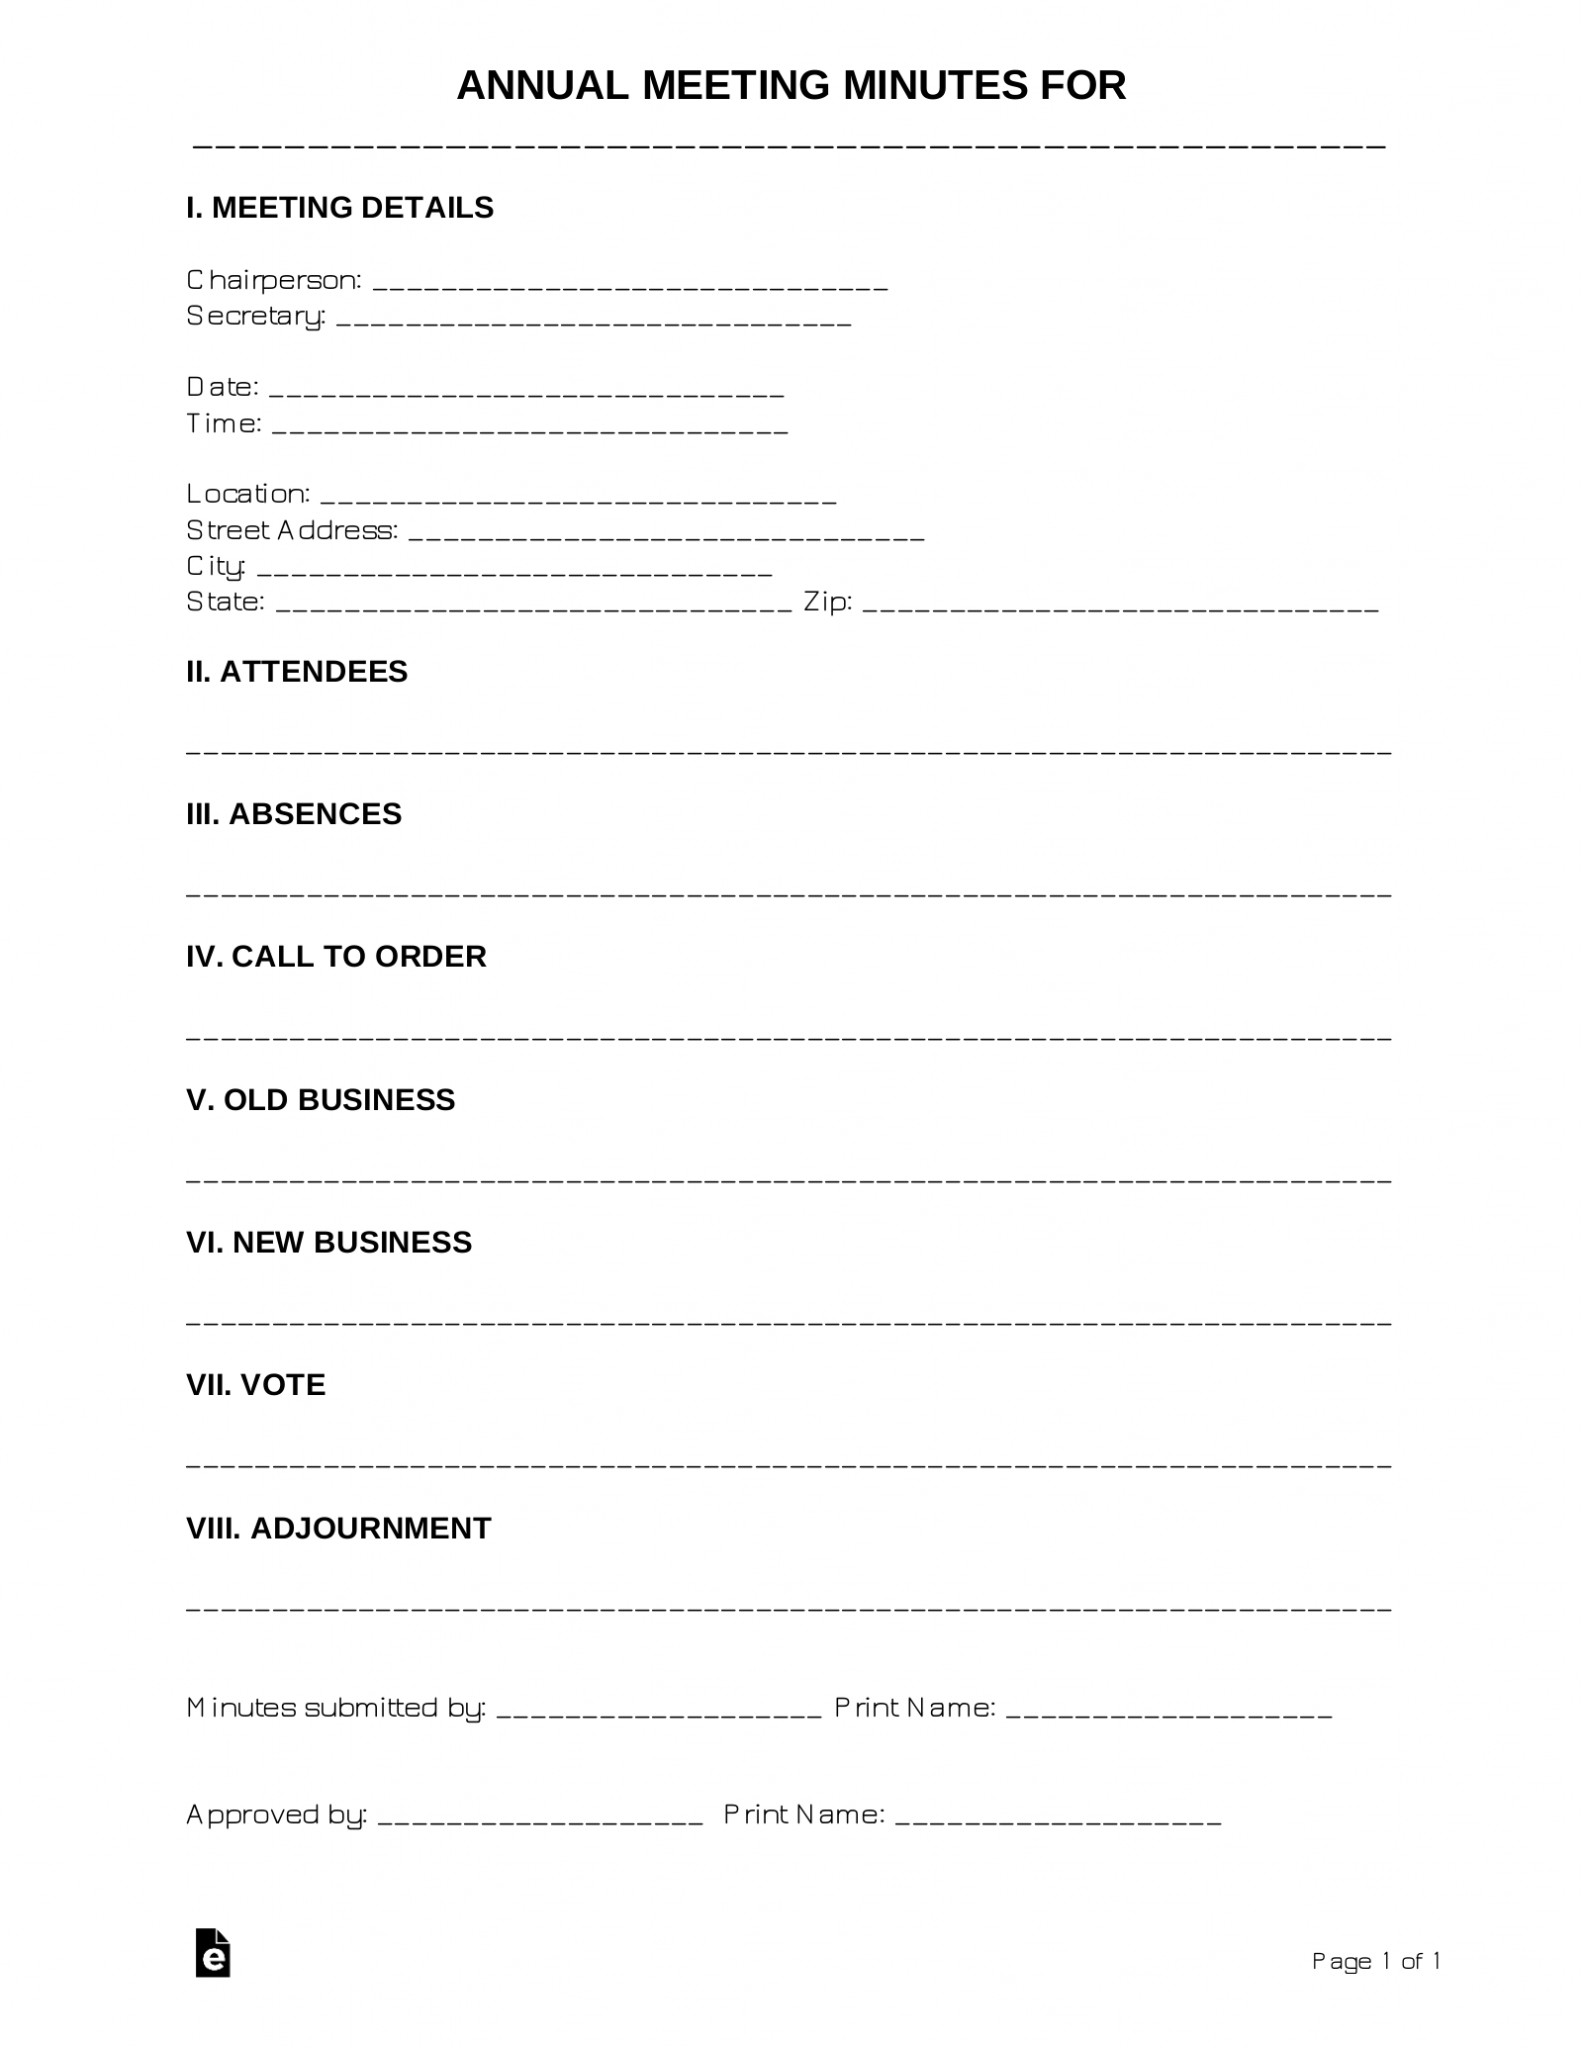 Free Annual Meeting Minutes Template Sample PDF Word eForms